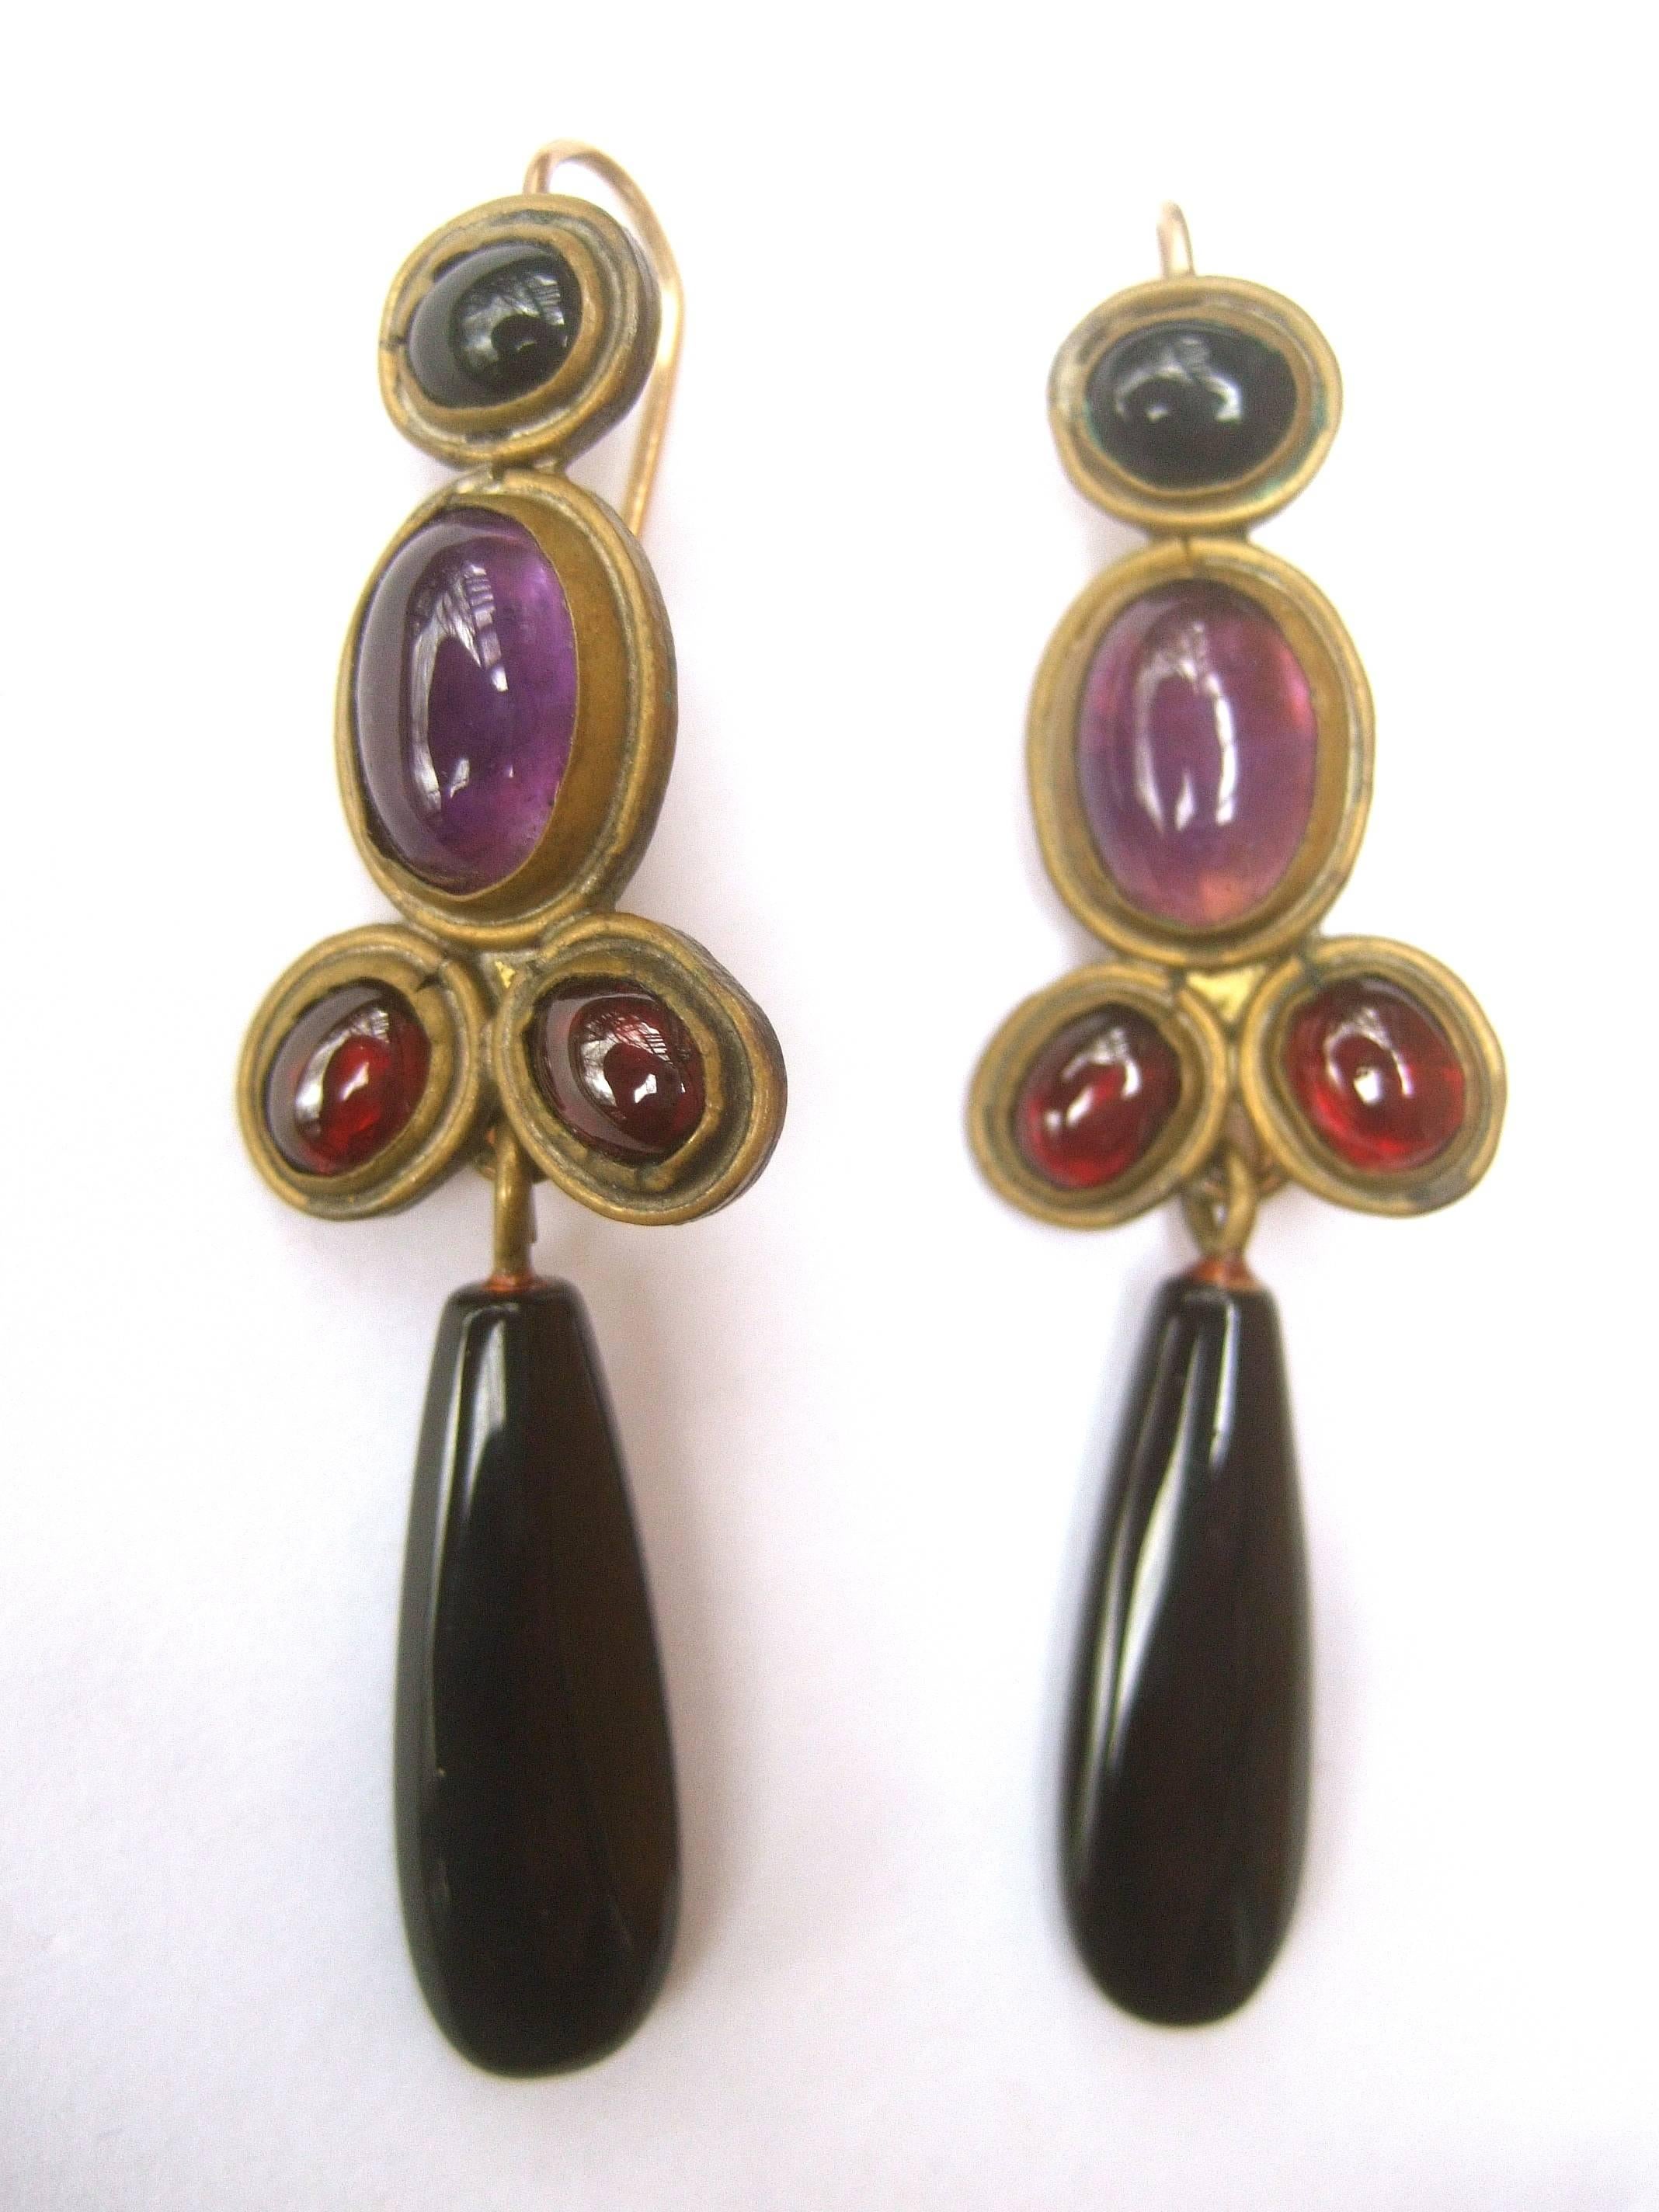 Opulent artisan semi precious dangle earrings by Karen Seberi 
The elegant handmade pierced dangle earrings are designed
with a collection of amethyst, garnet and jet semi precious
translucent smooth cabochons 

The stones are set in brass metal